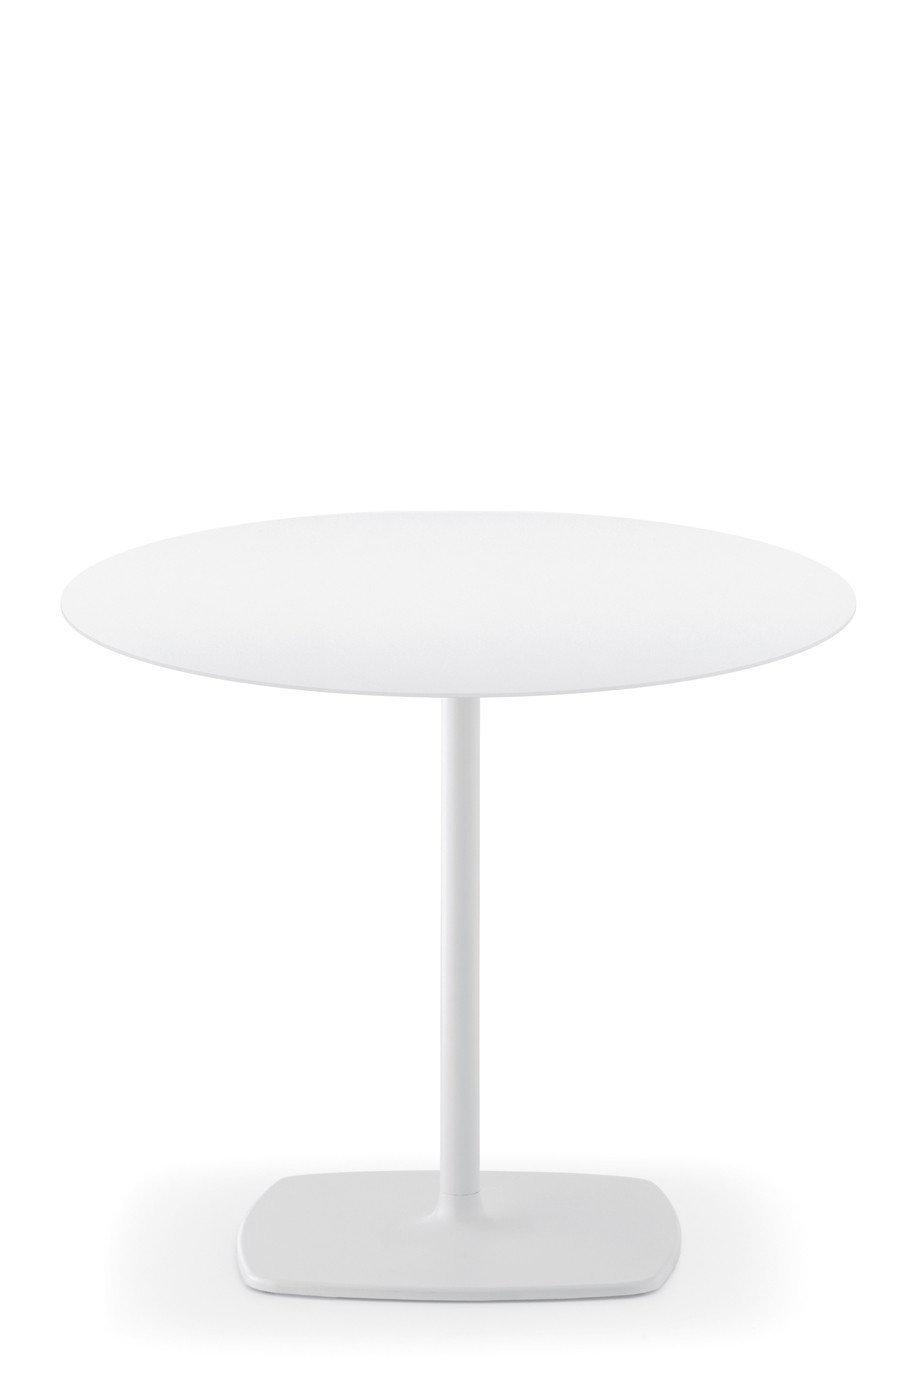 Stylus 5410 Dining Base-Pedrali-Contract Furniture Store